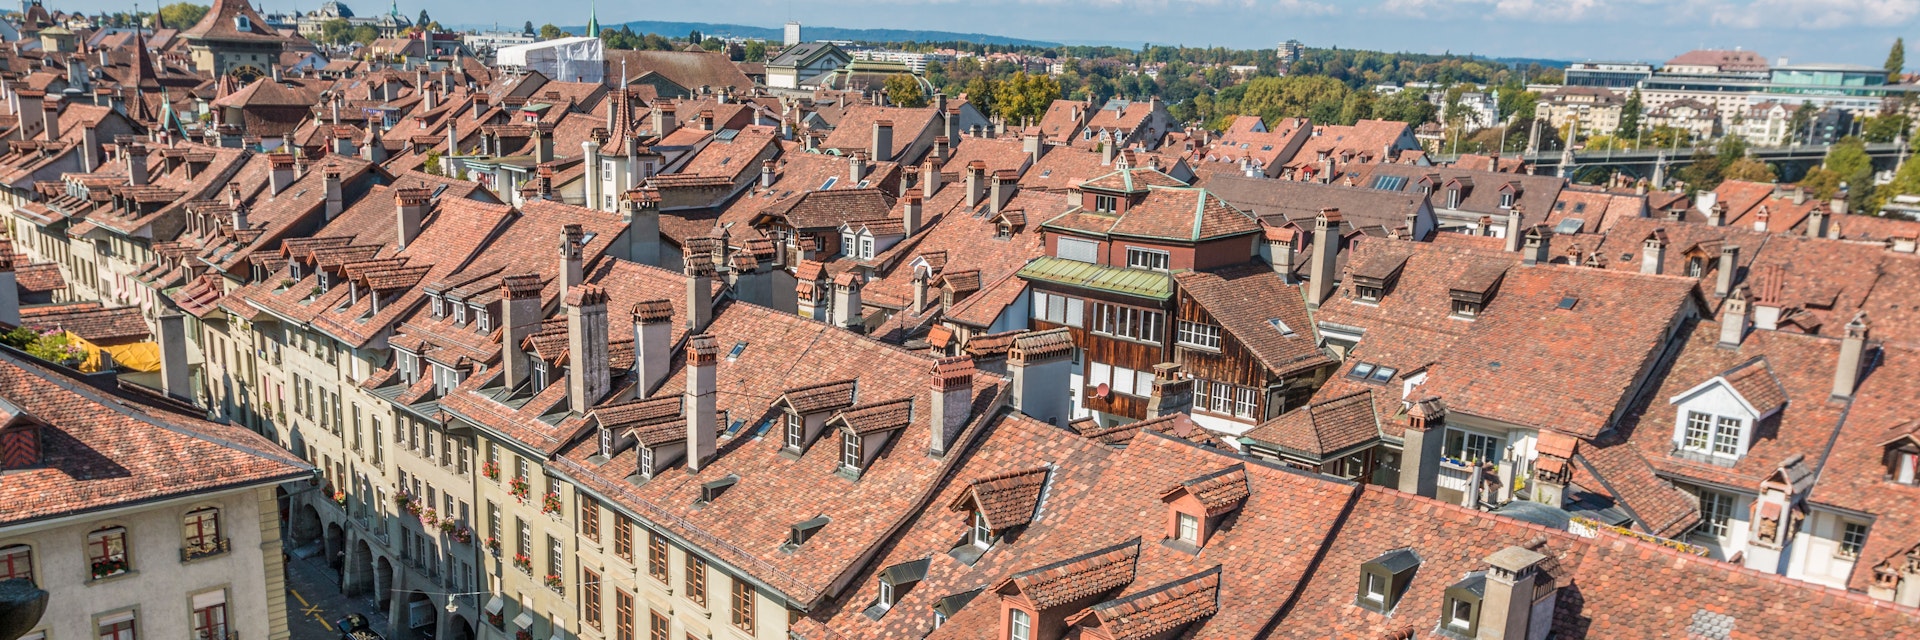 Rooftops in the old town district of Bern.